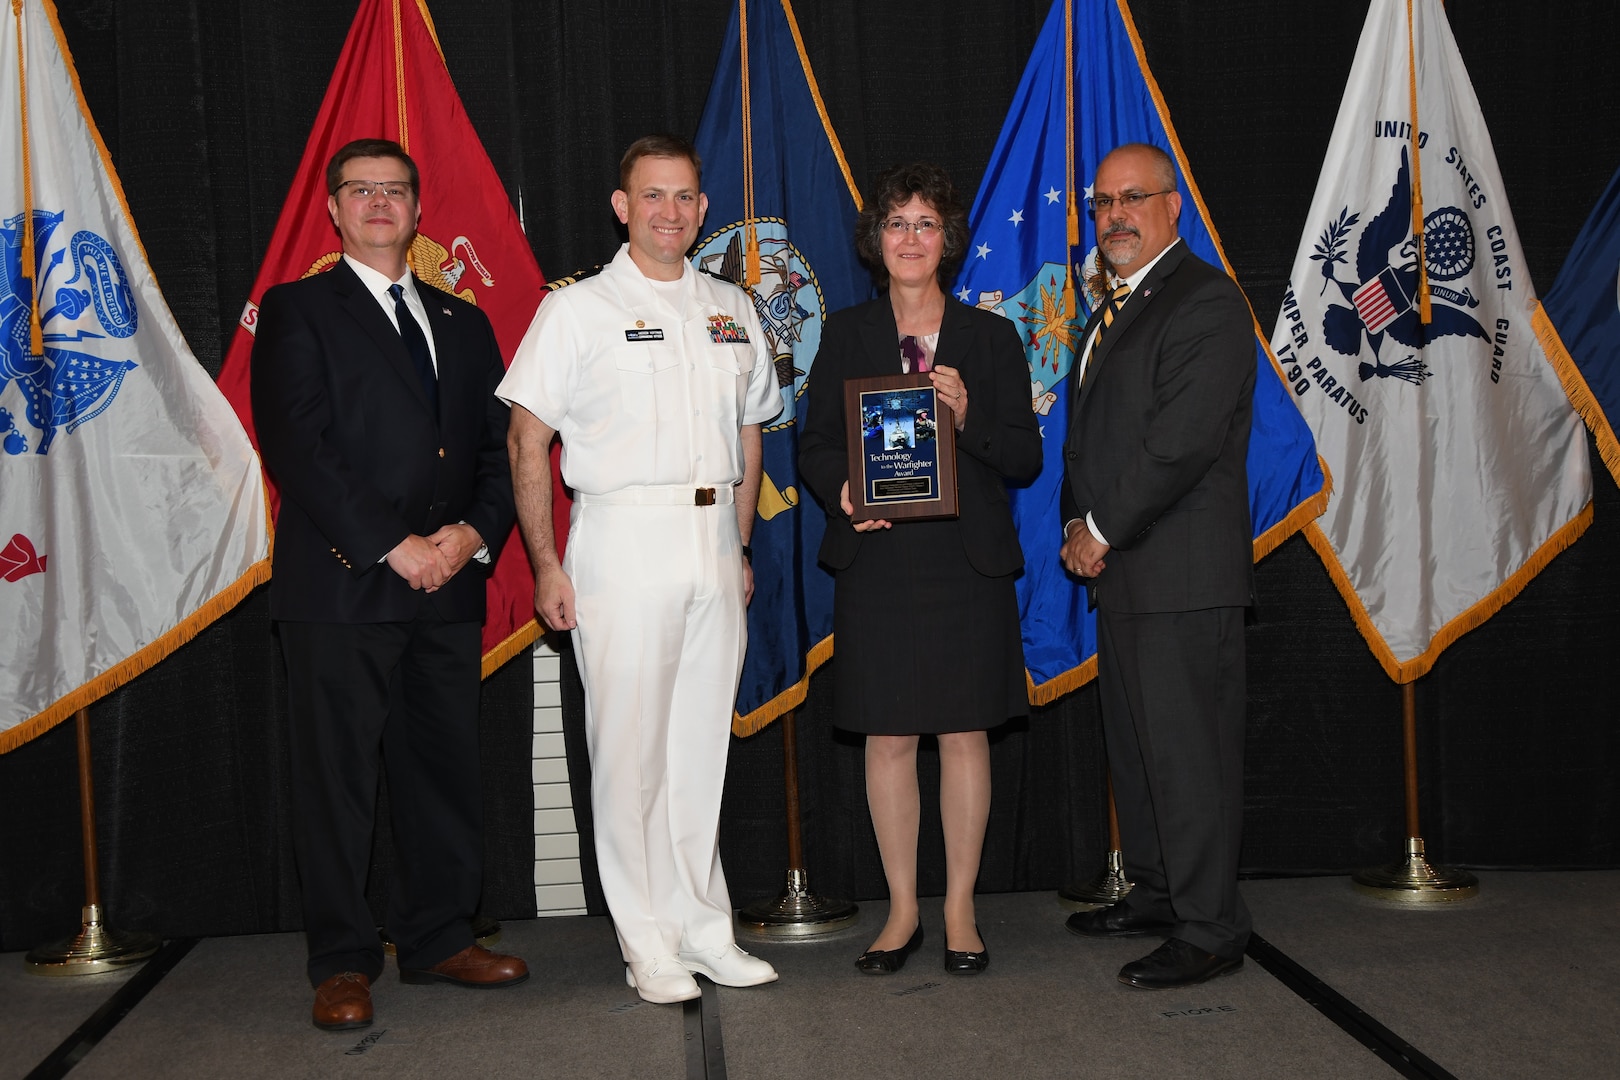 IMAGE: The Combined Integrated Air and Missile Defense and Anti-Submarine Warfare Trainer (CIAT) Version 1
Development and Delivery Team received the Technology to the Warfighter Award at the NSWCDD Honorary Awards Ceremony held at the Fredericksburg Expo and Conference Center, April 26. The Technology to the Warfighter Award recognizes individuals or groups who have had a notable and significant impact on the warfighter by developing needed capability and transitioning it into operations. The intent of this award is to recognize direct contributions to the warfighter and their operational impact.